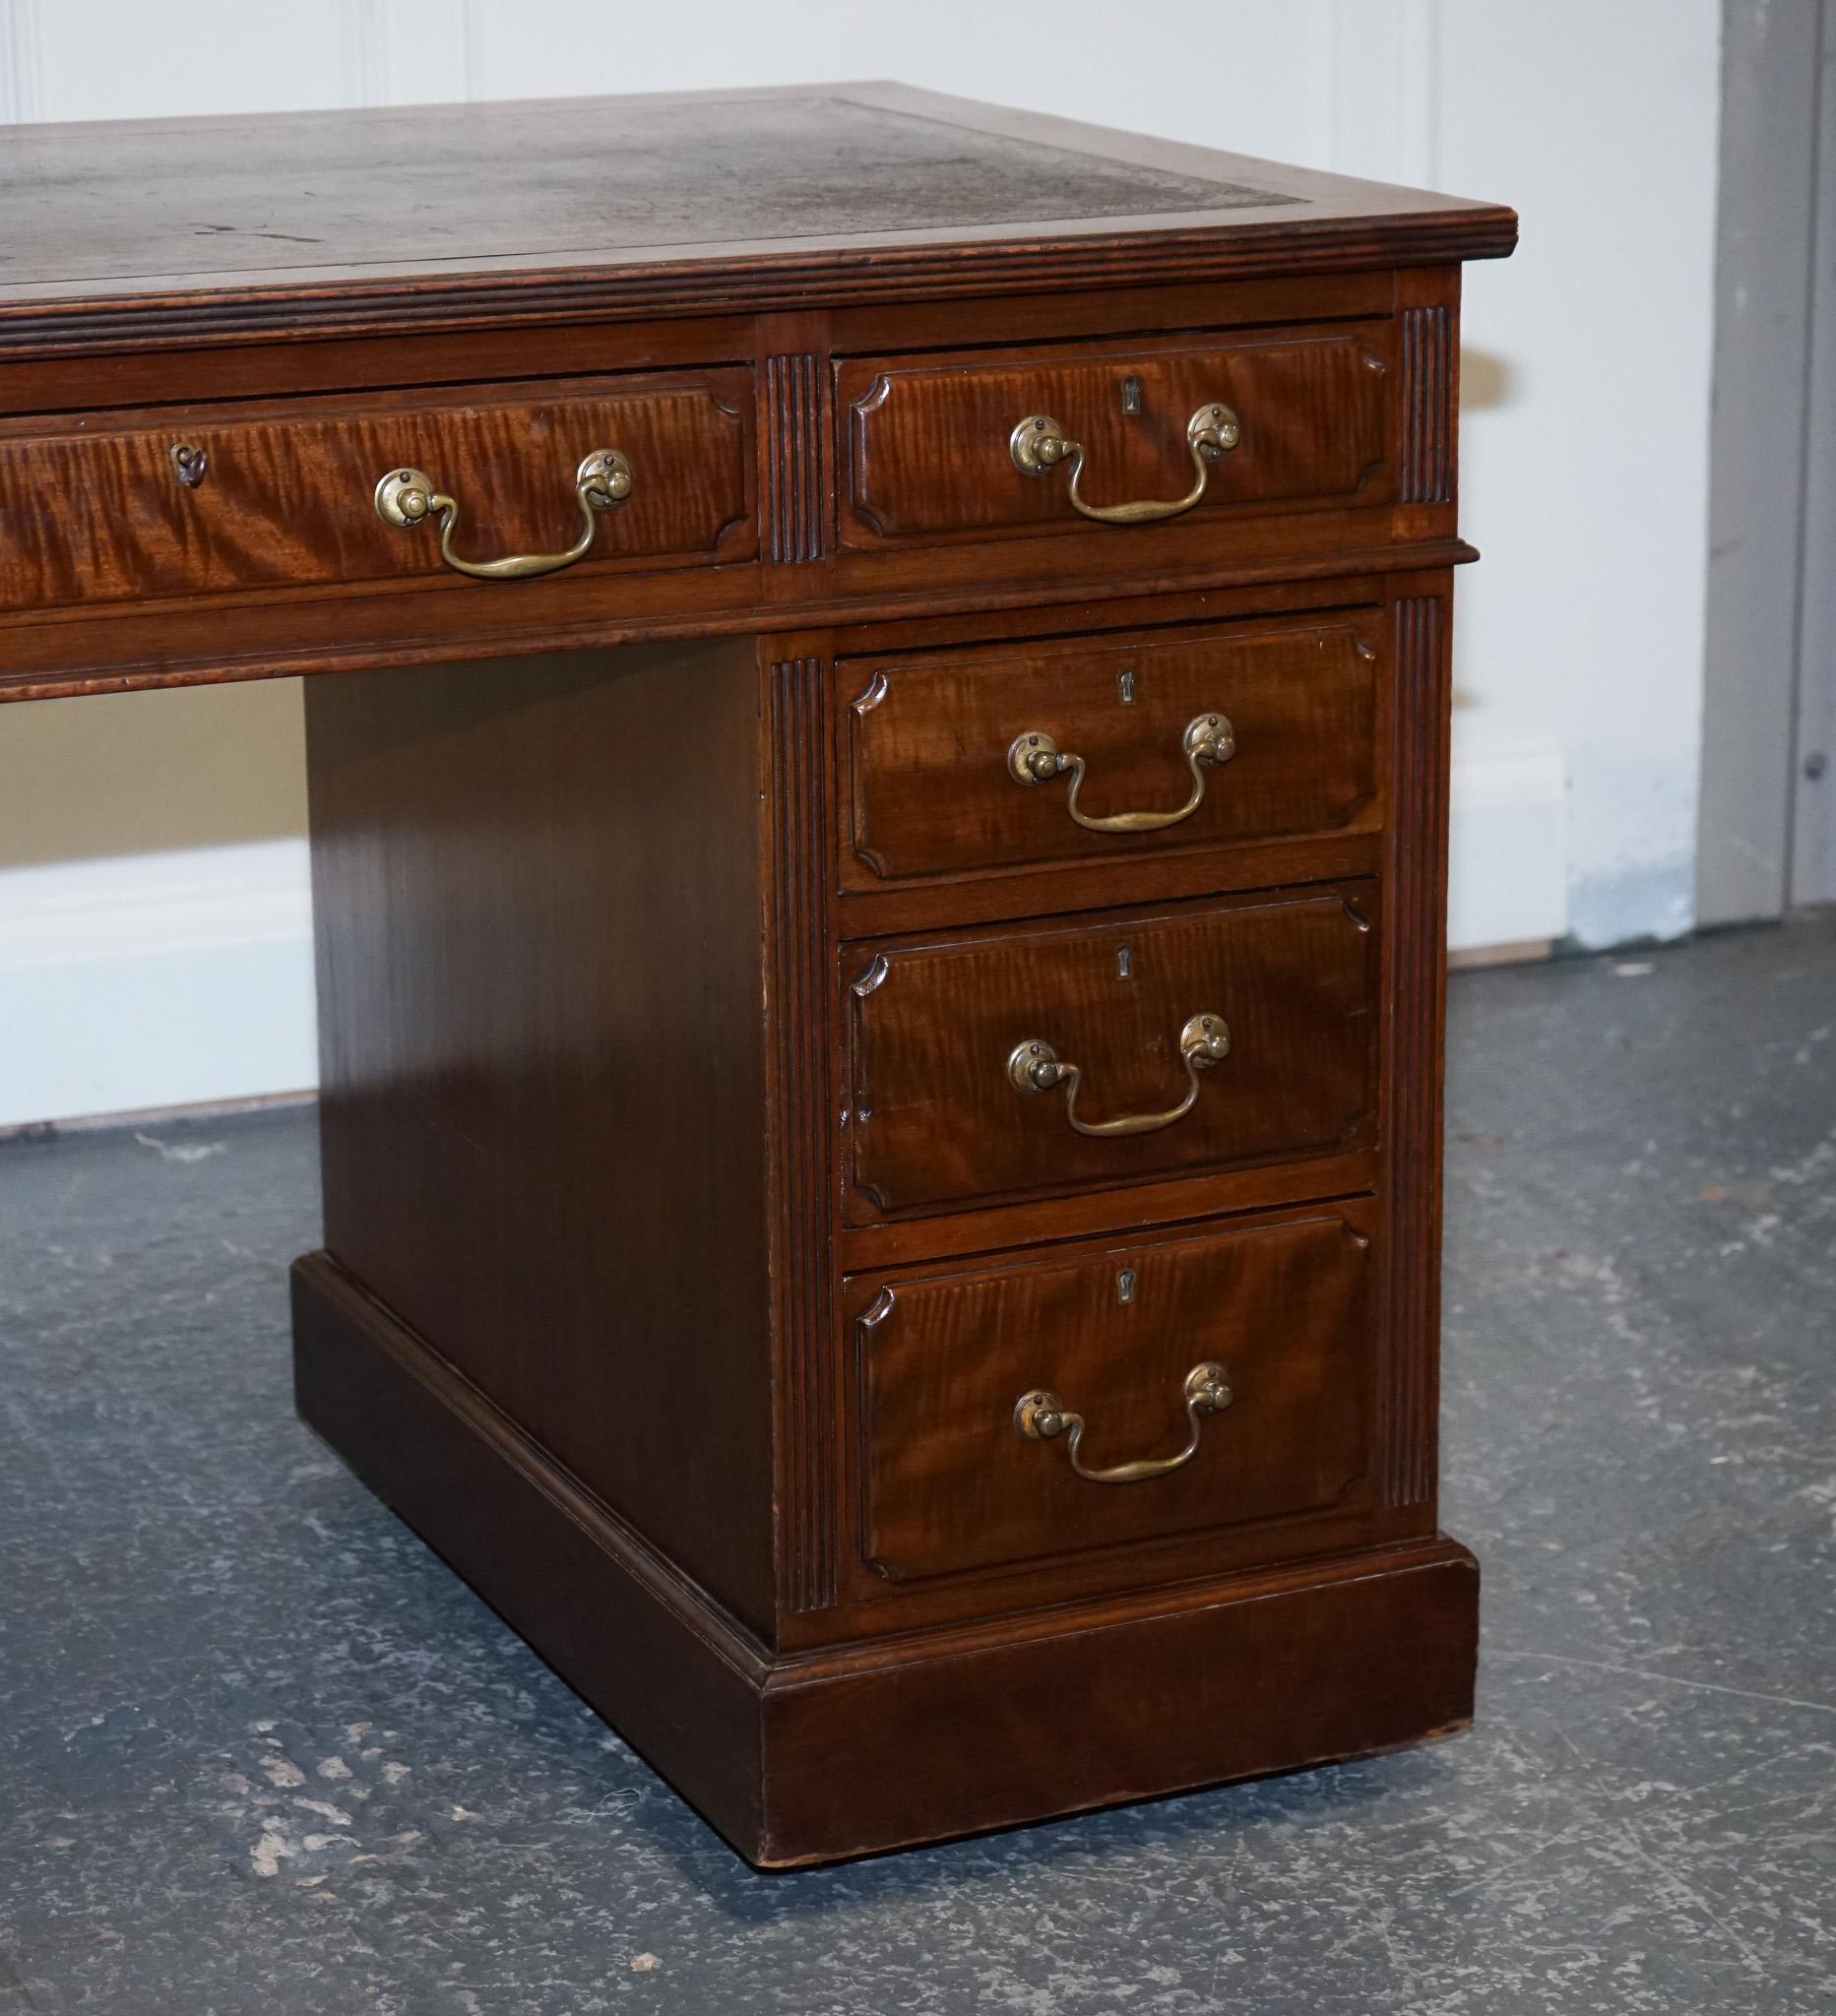 Edwardian Maple & Co Pedestal Writing Desk Distressed Brown Embossed Leather In Good Condition For Sale In Pulborough, GB